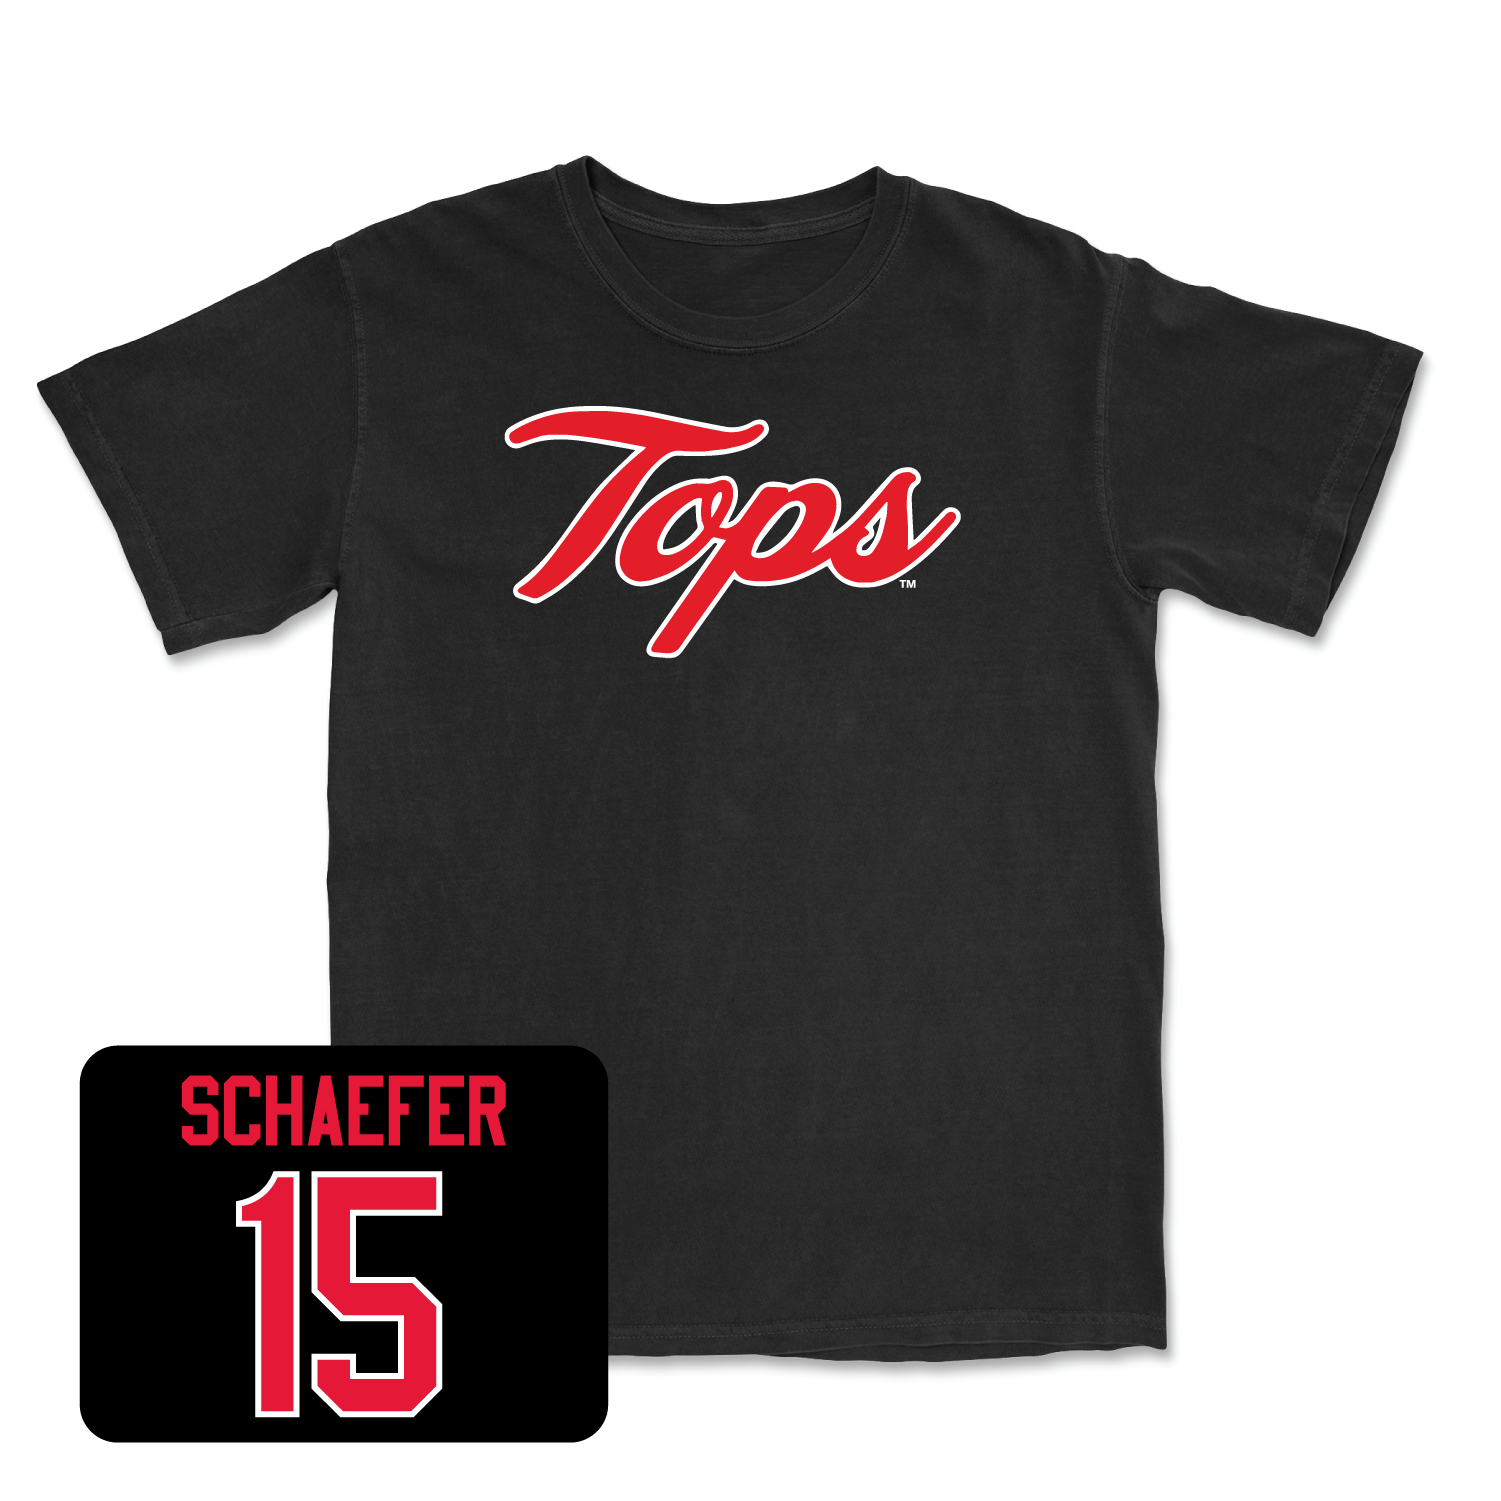 Black Women's Volleyball Tops Tee Youth Large / Abigail Schaefer | #15